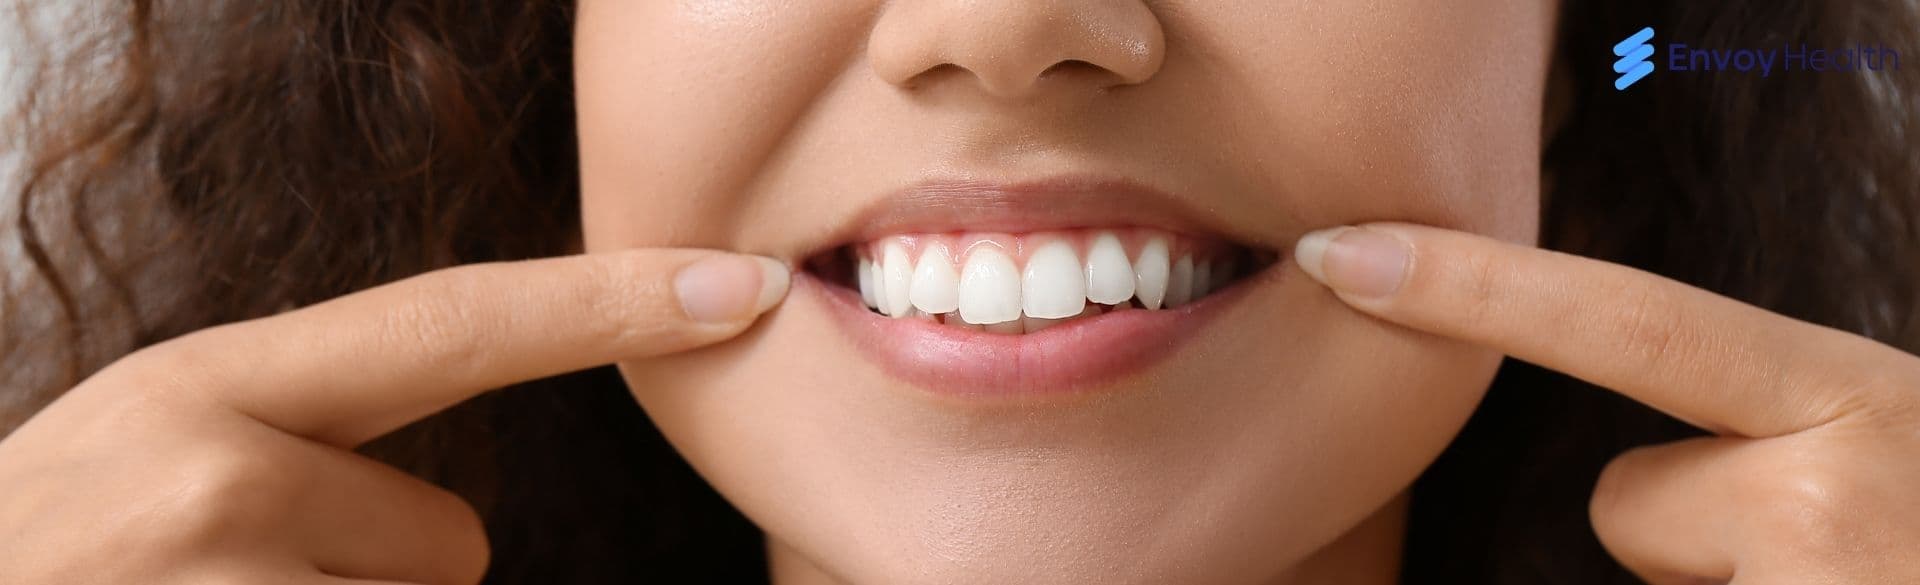 How Long Does it Take to Get Dental Implants in Mexico?